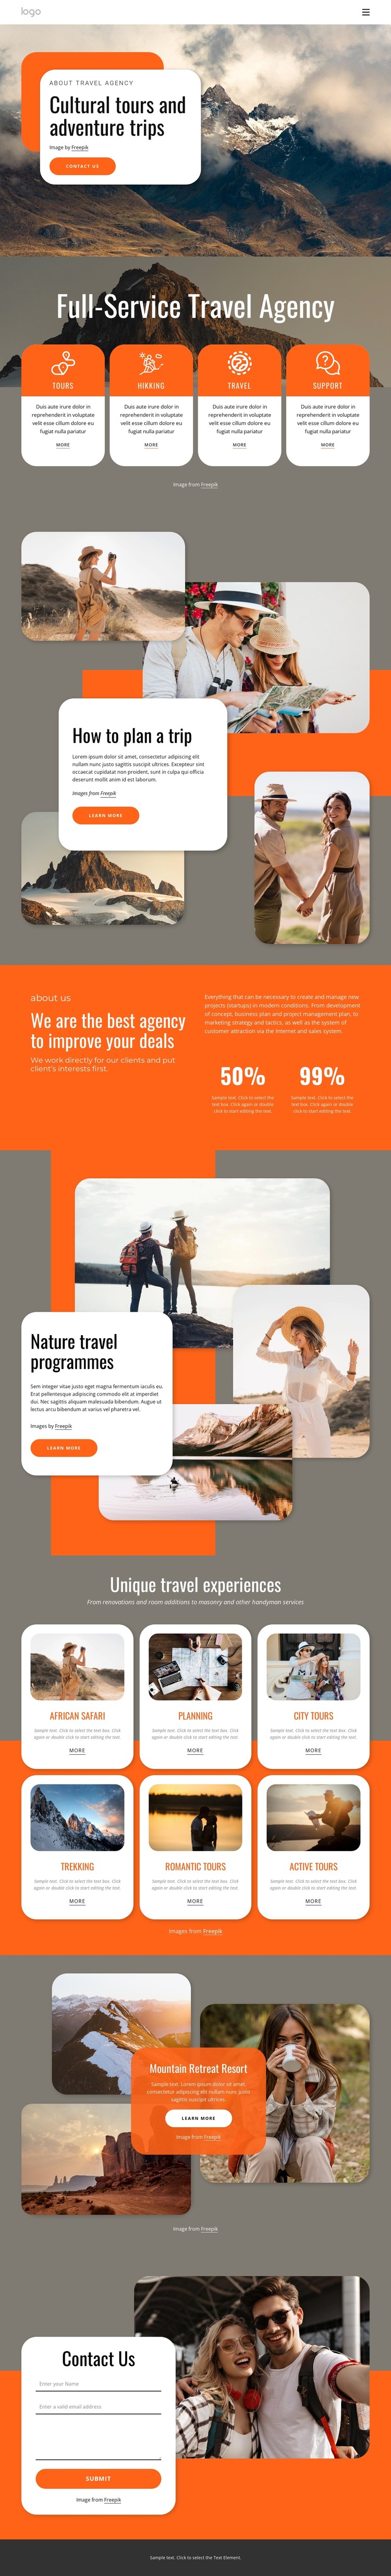 Group travel for all ages HTML Template